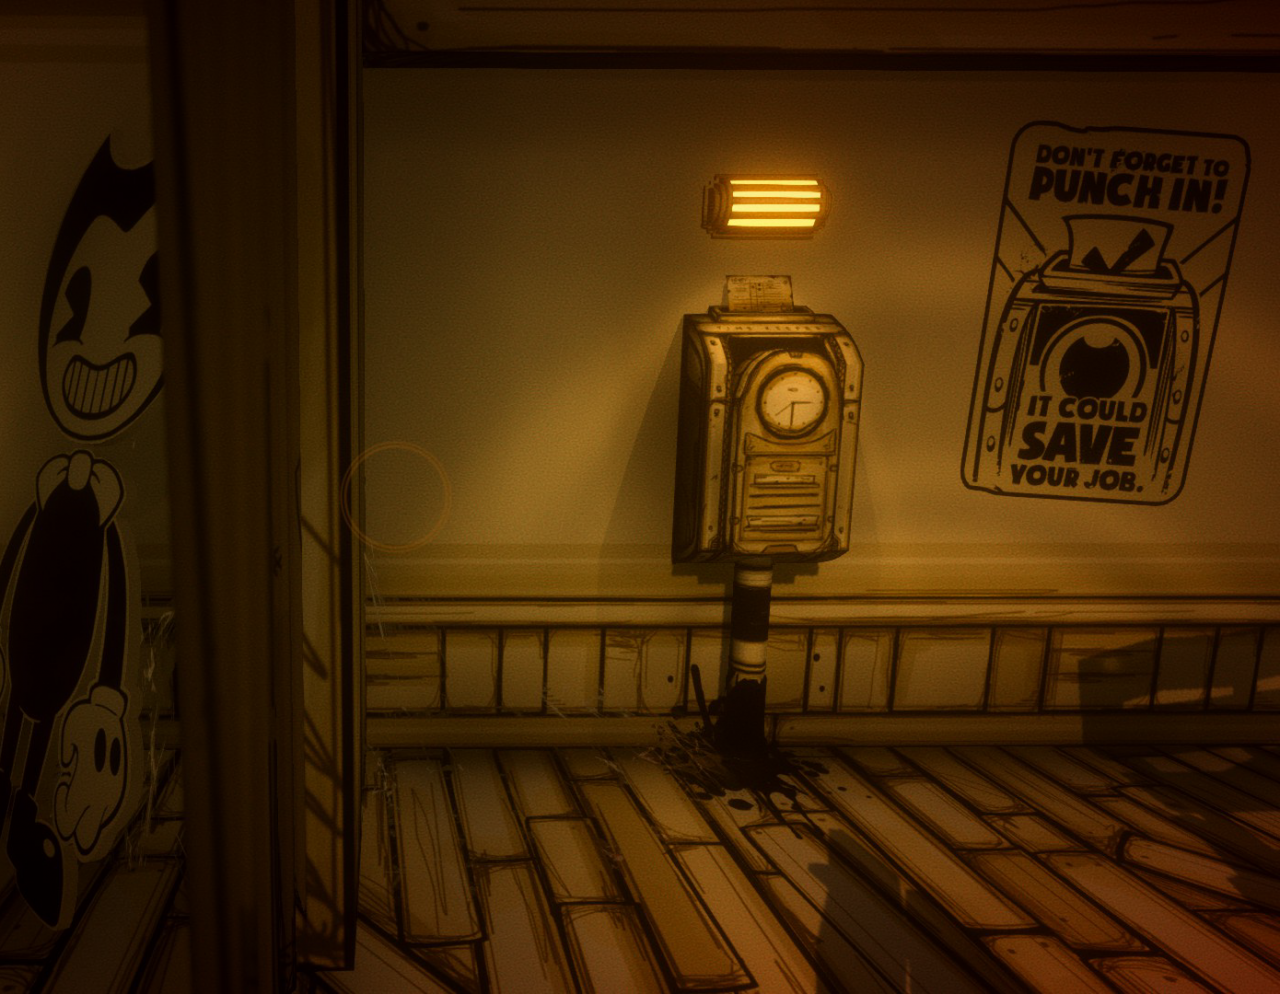 Bendy and the Ink Machine - PCGamingWiki PCGW - bugs, fixes, crashes, mods,  guides and improvements for every PC game